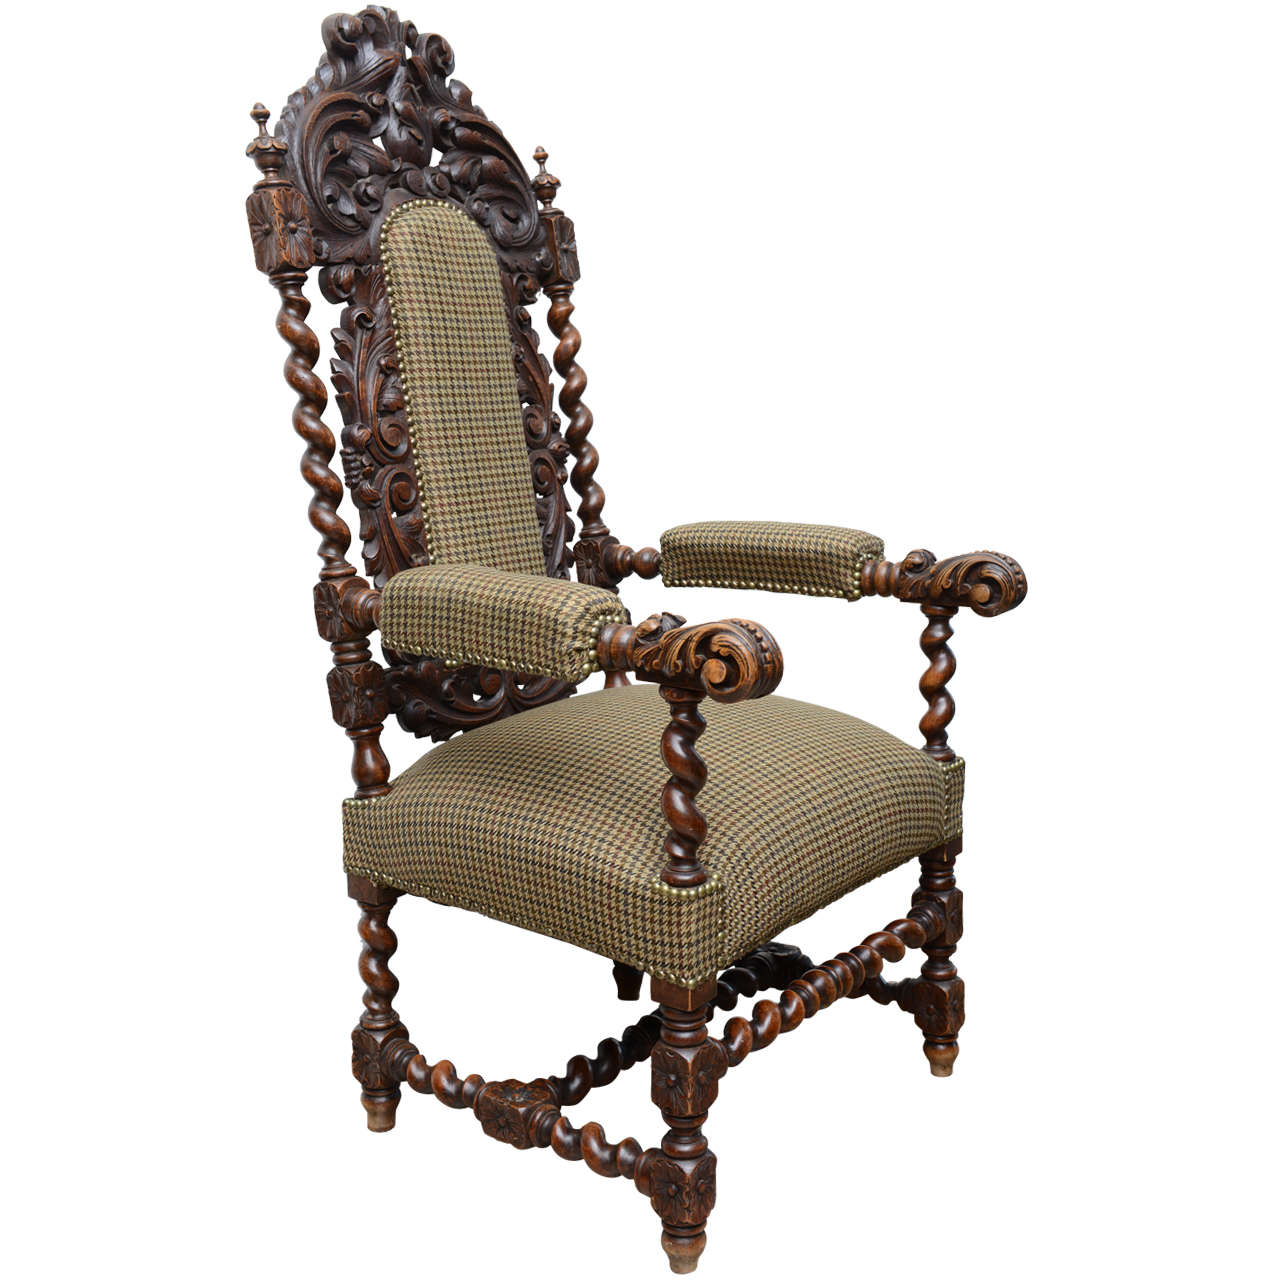 Hand Carved Throne Arm Chair, with Nailheads, 19th century